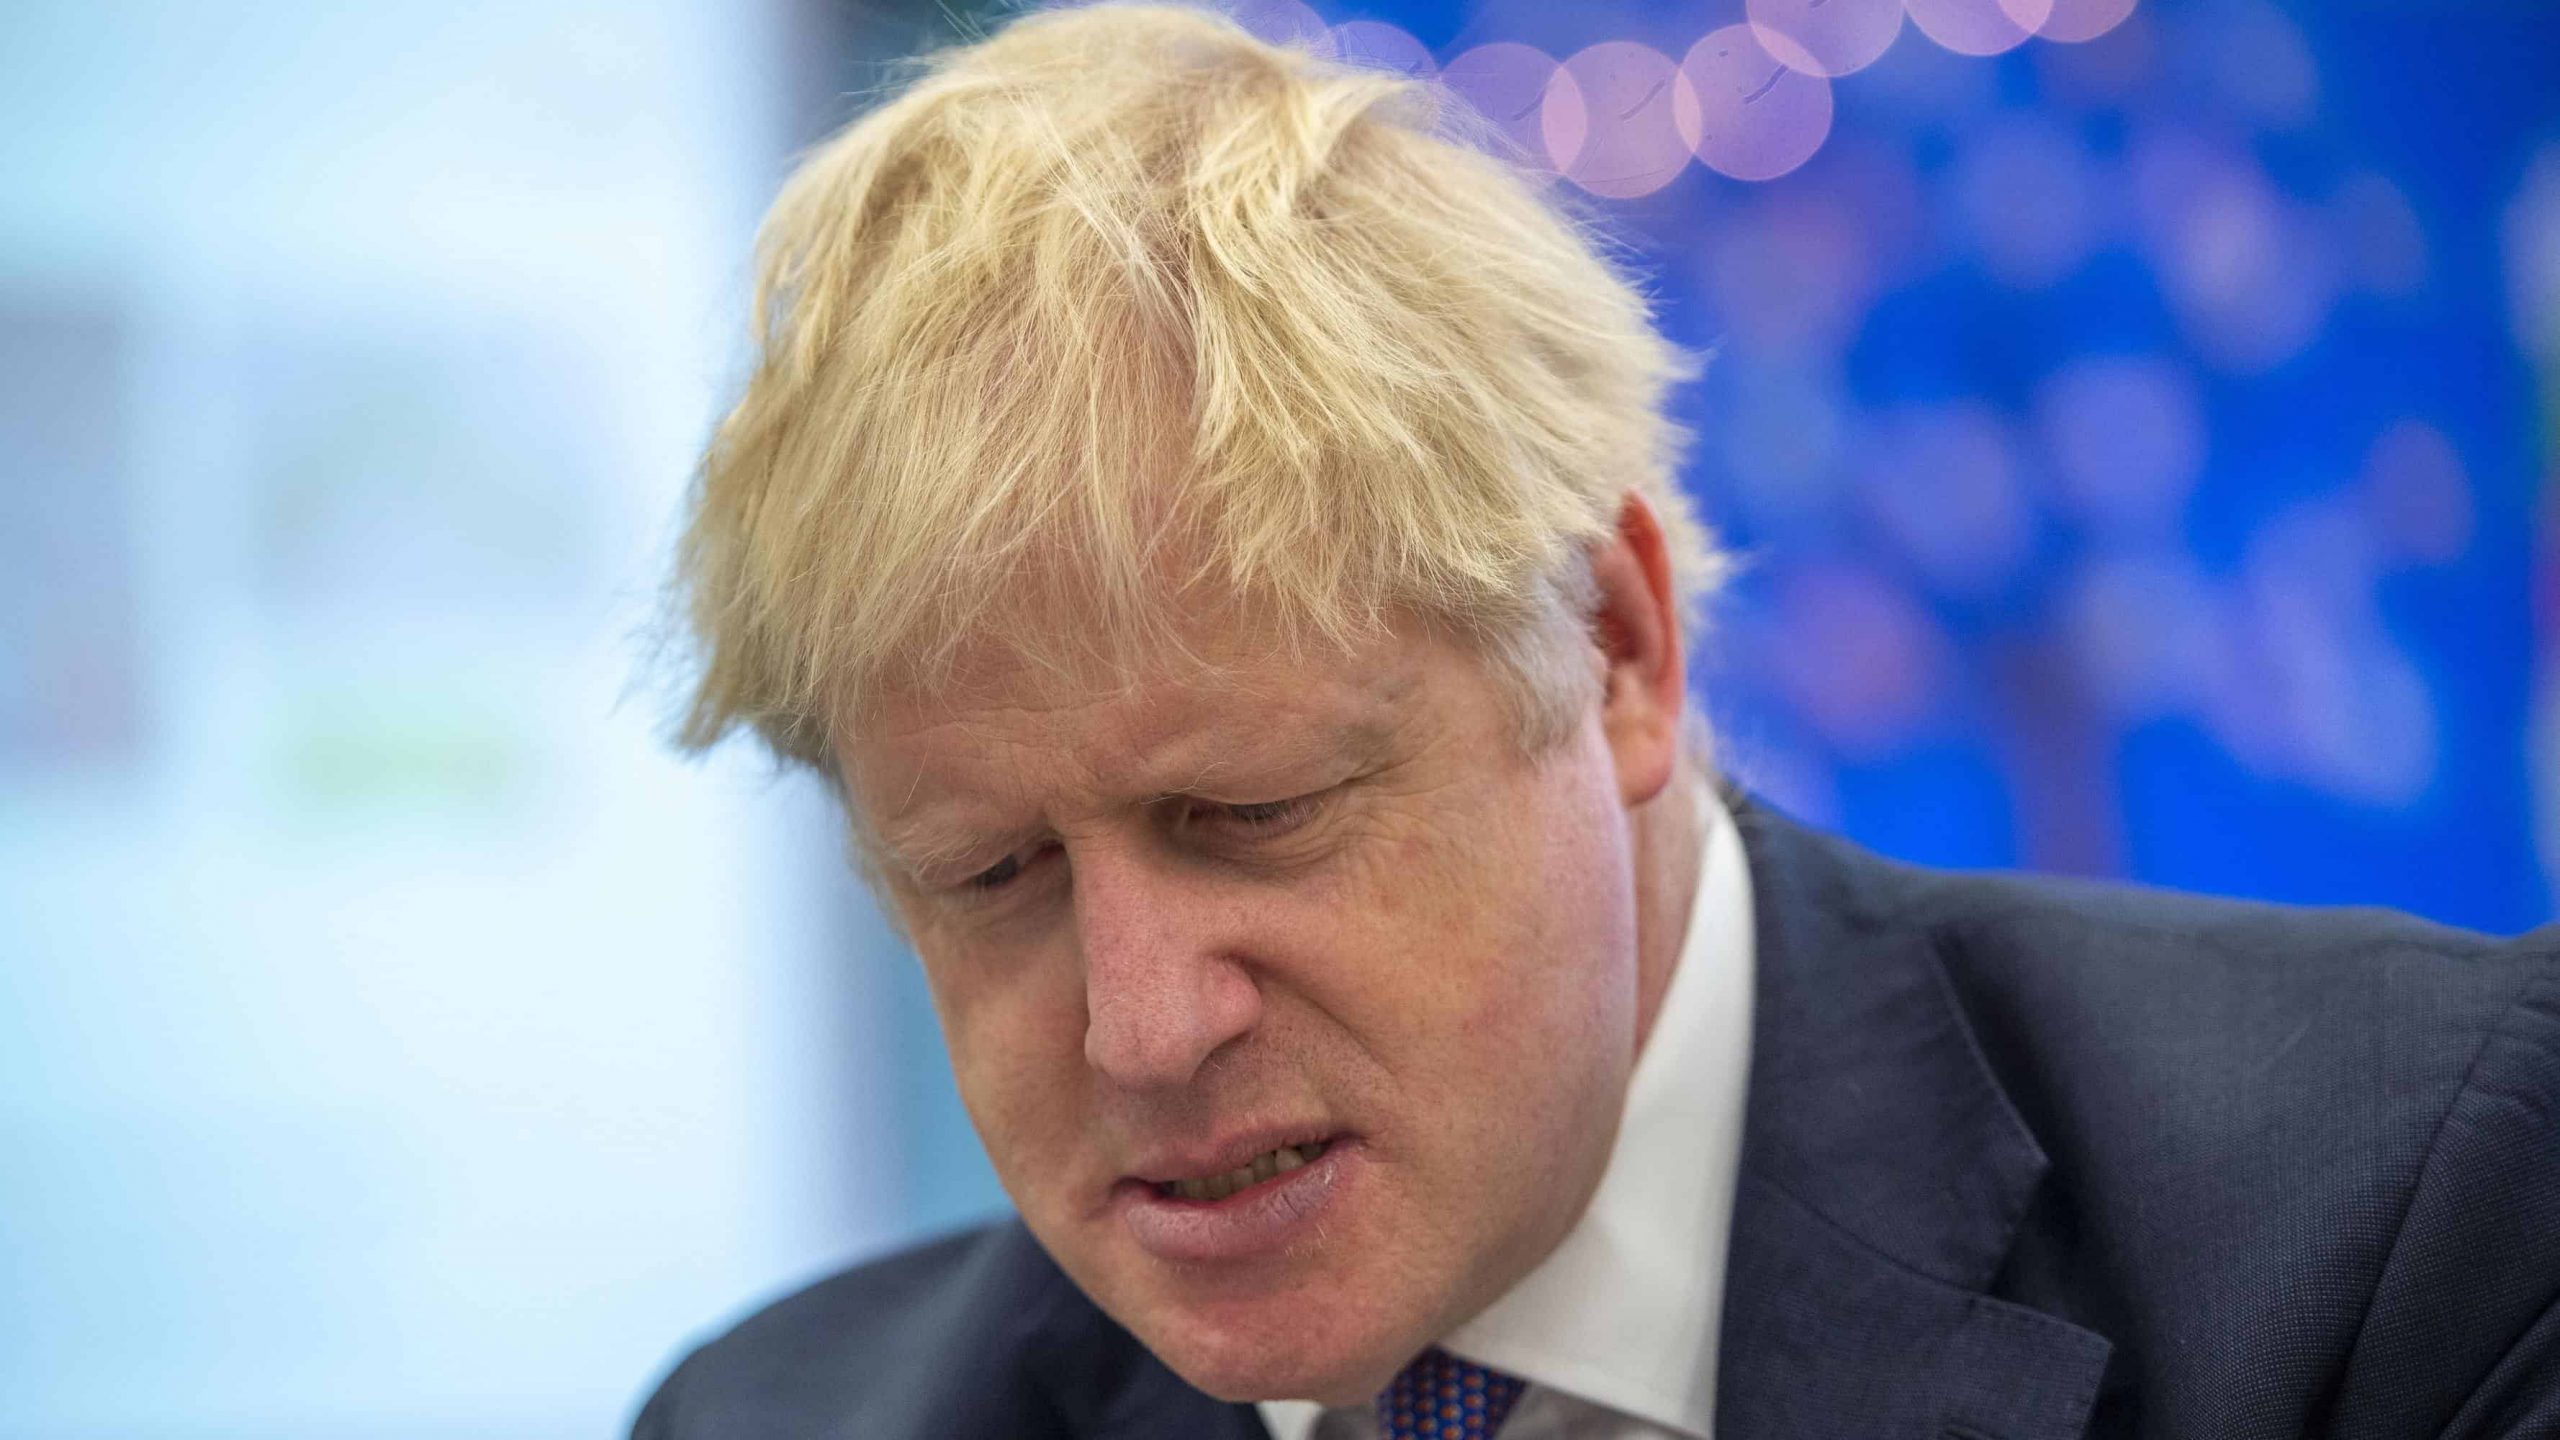 Lib Dems and SNP set to offer Boris Johnson path to December election